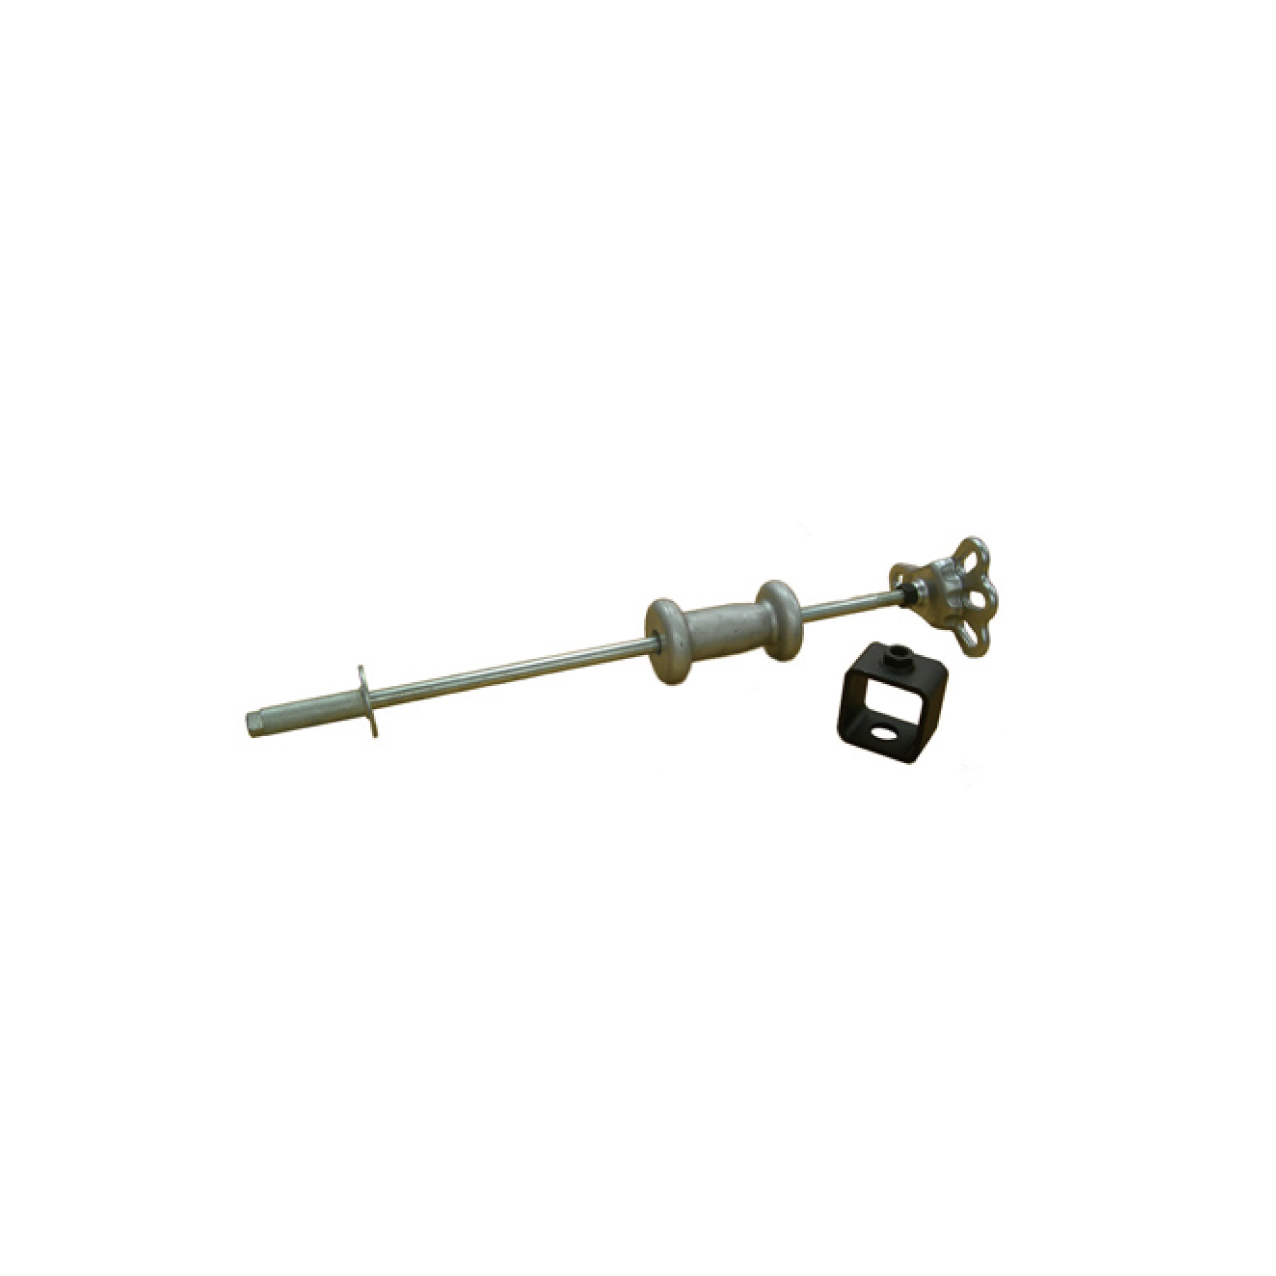  FRONT WHEEL DRIVE AXLE PULLER